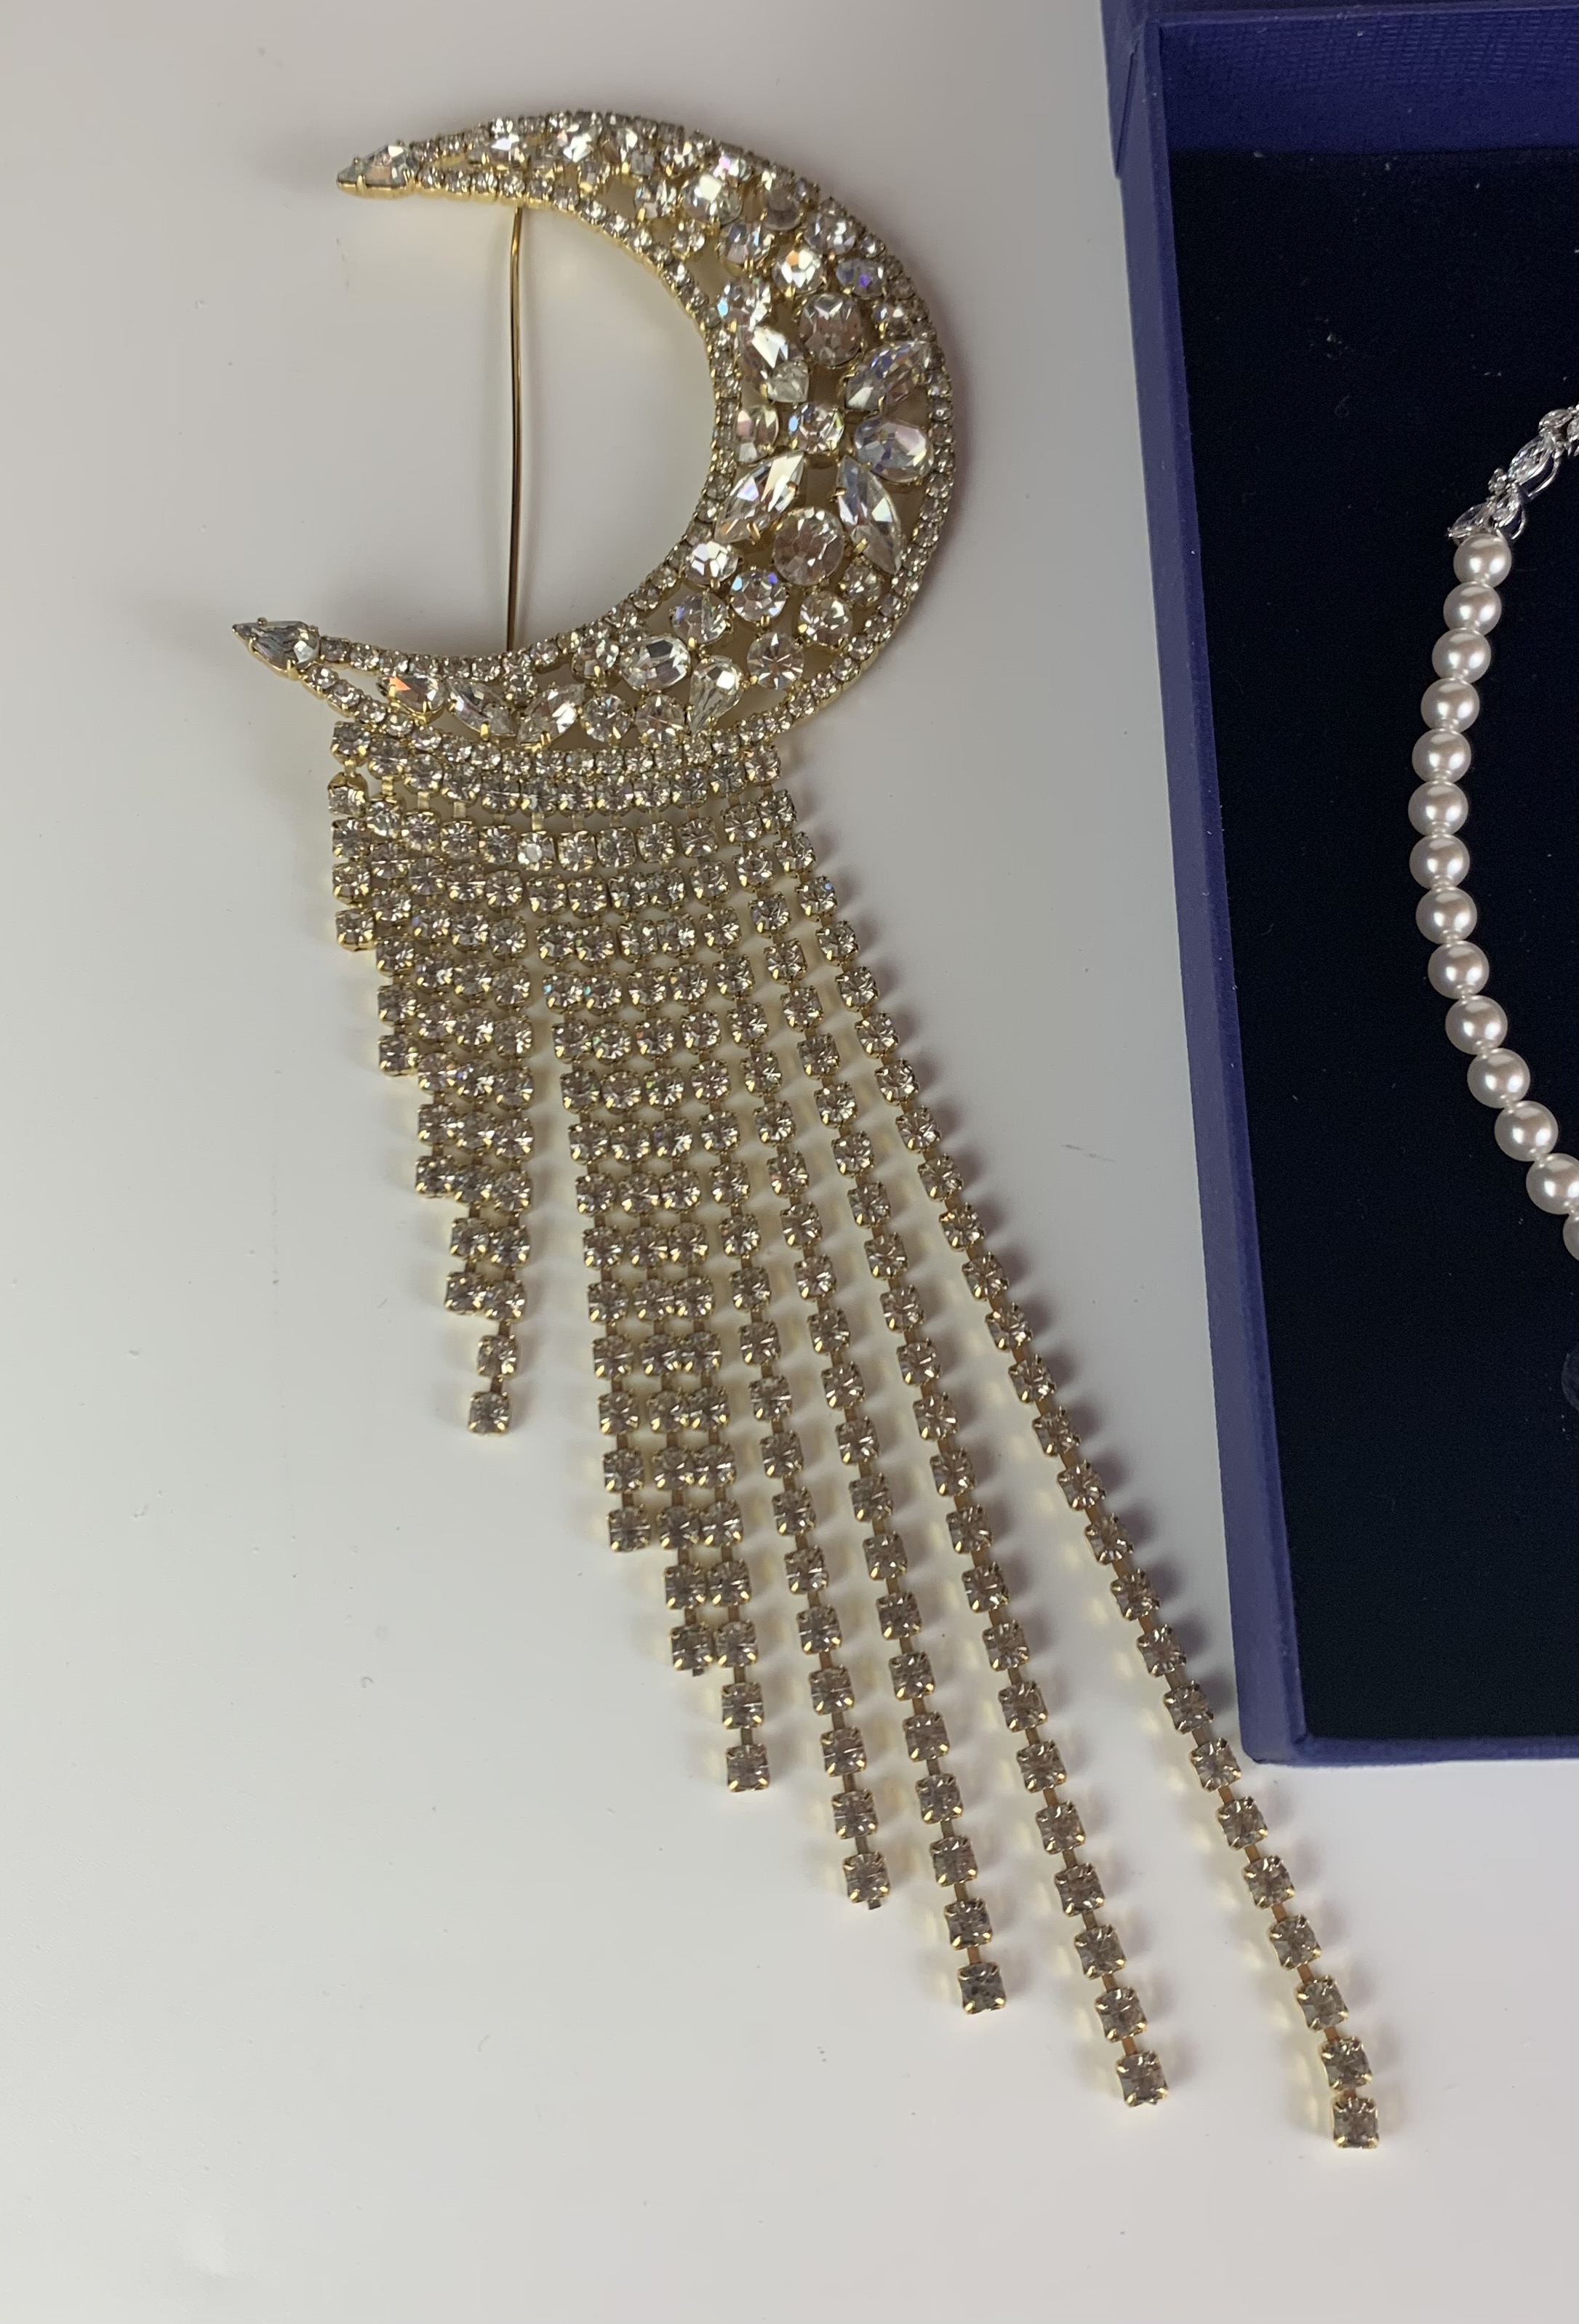 Boxed Swarovski and pearl necklace, boxed Butler & Wilson dancing couples brooch (length 5”) and - Image 2 of 5